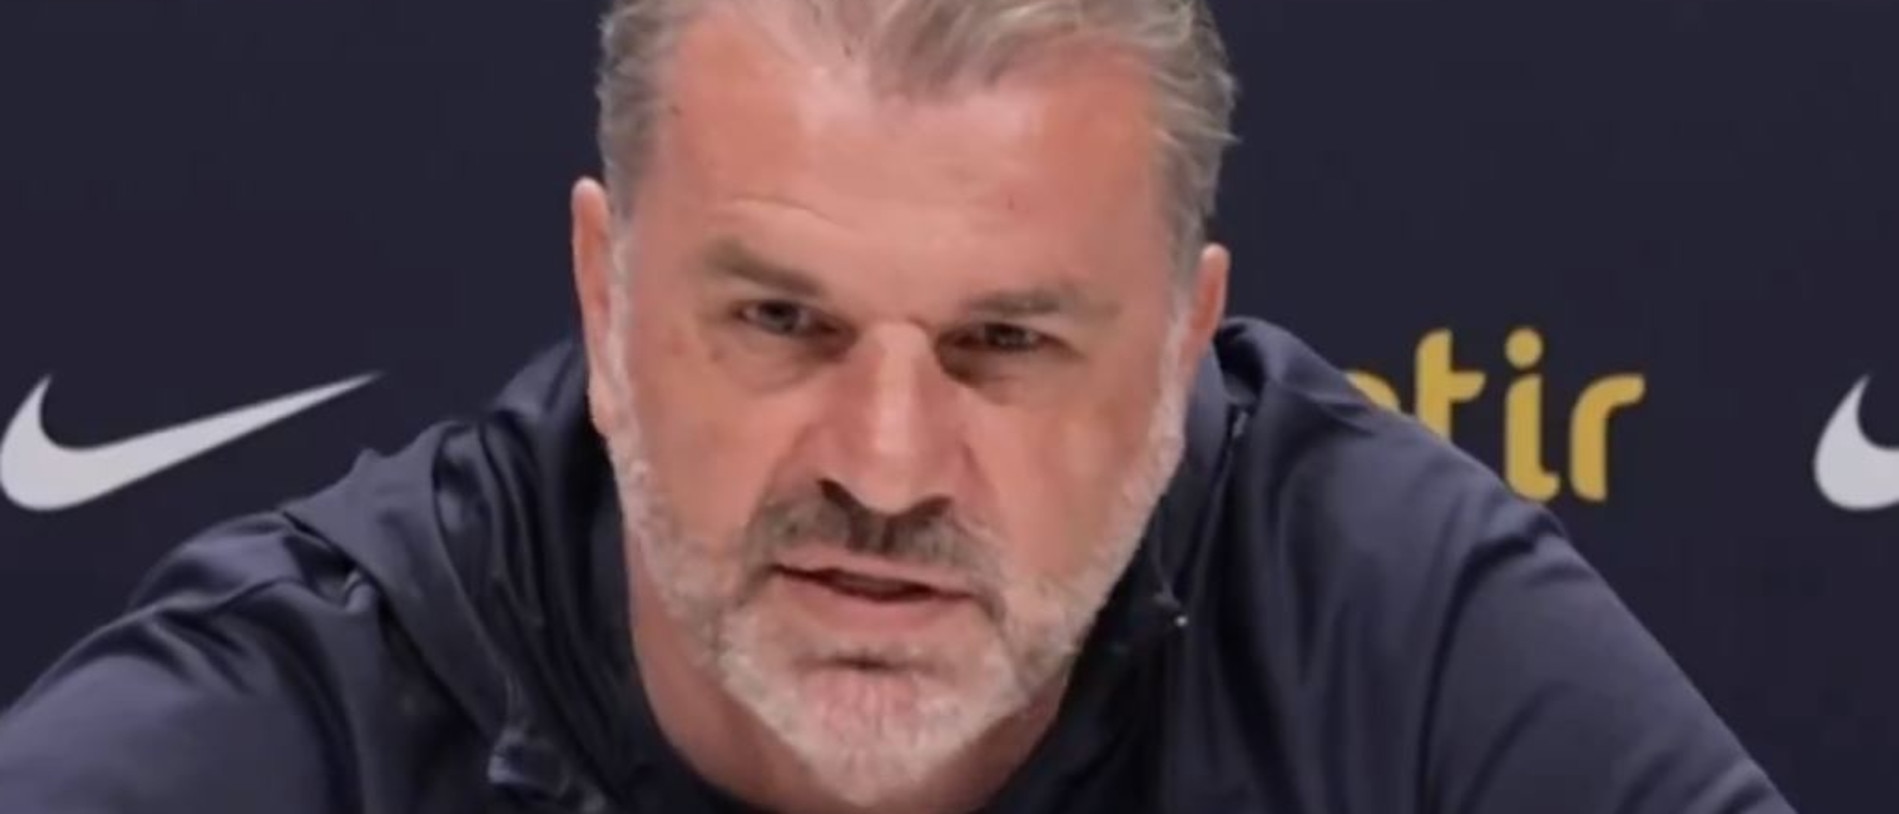 Ange Postecoglou was baffled at the thought of Tottenham fans wanting to lose to Manchester City. Picture: Supplied